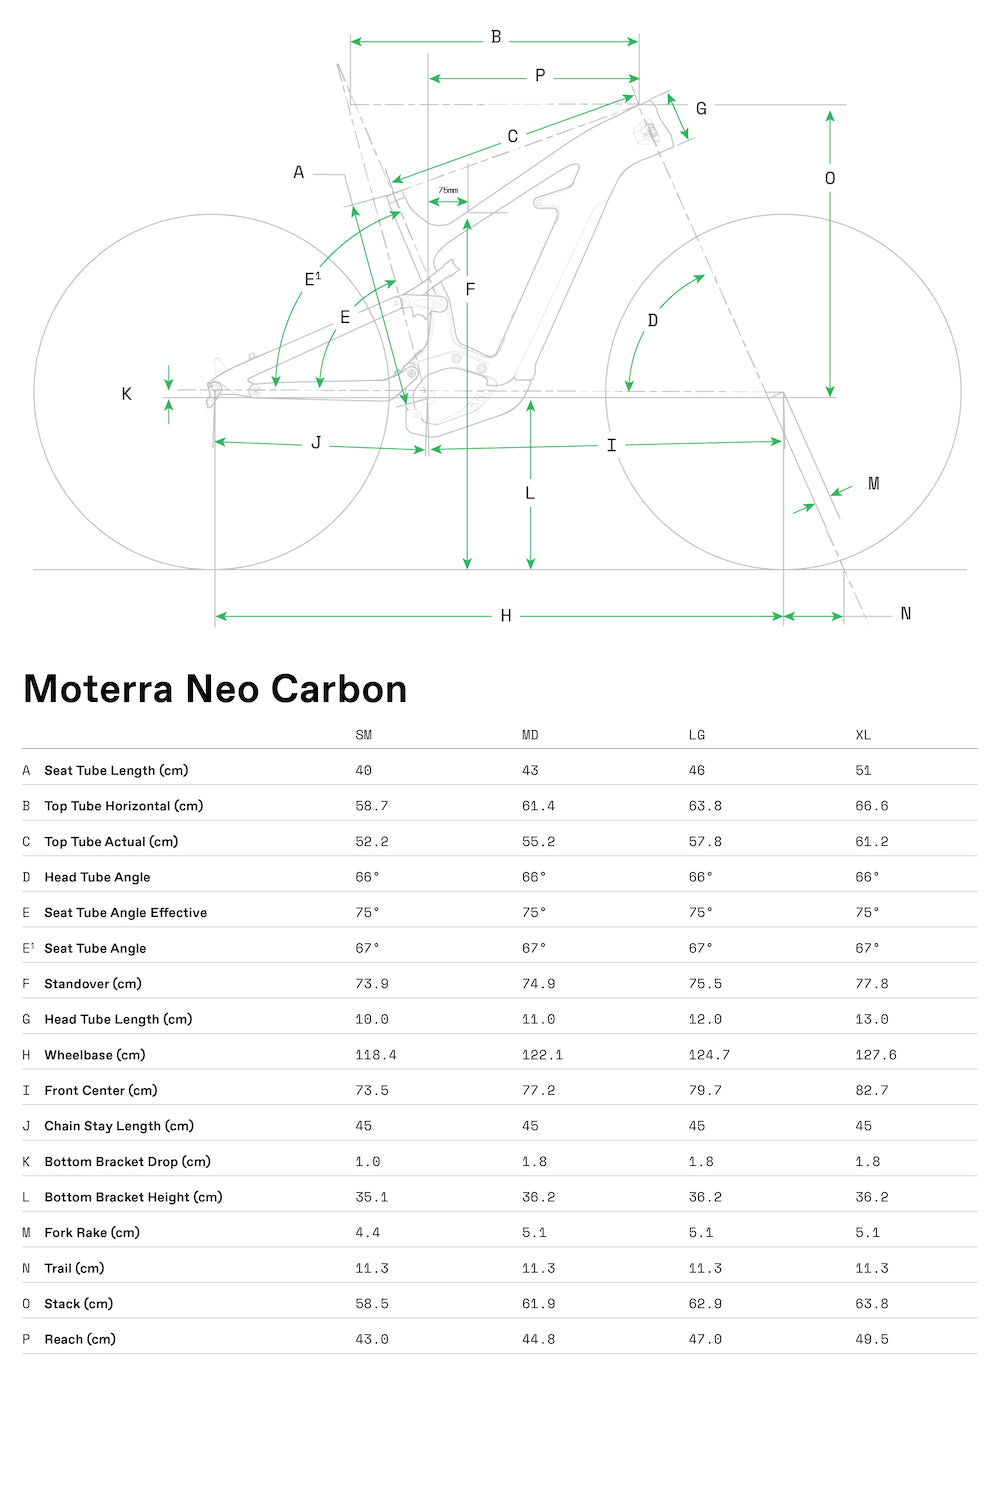 Cannondale Moterra Neo Crb 2 Geometry